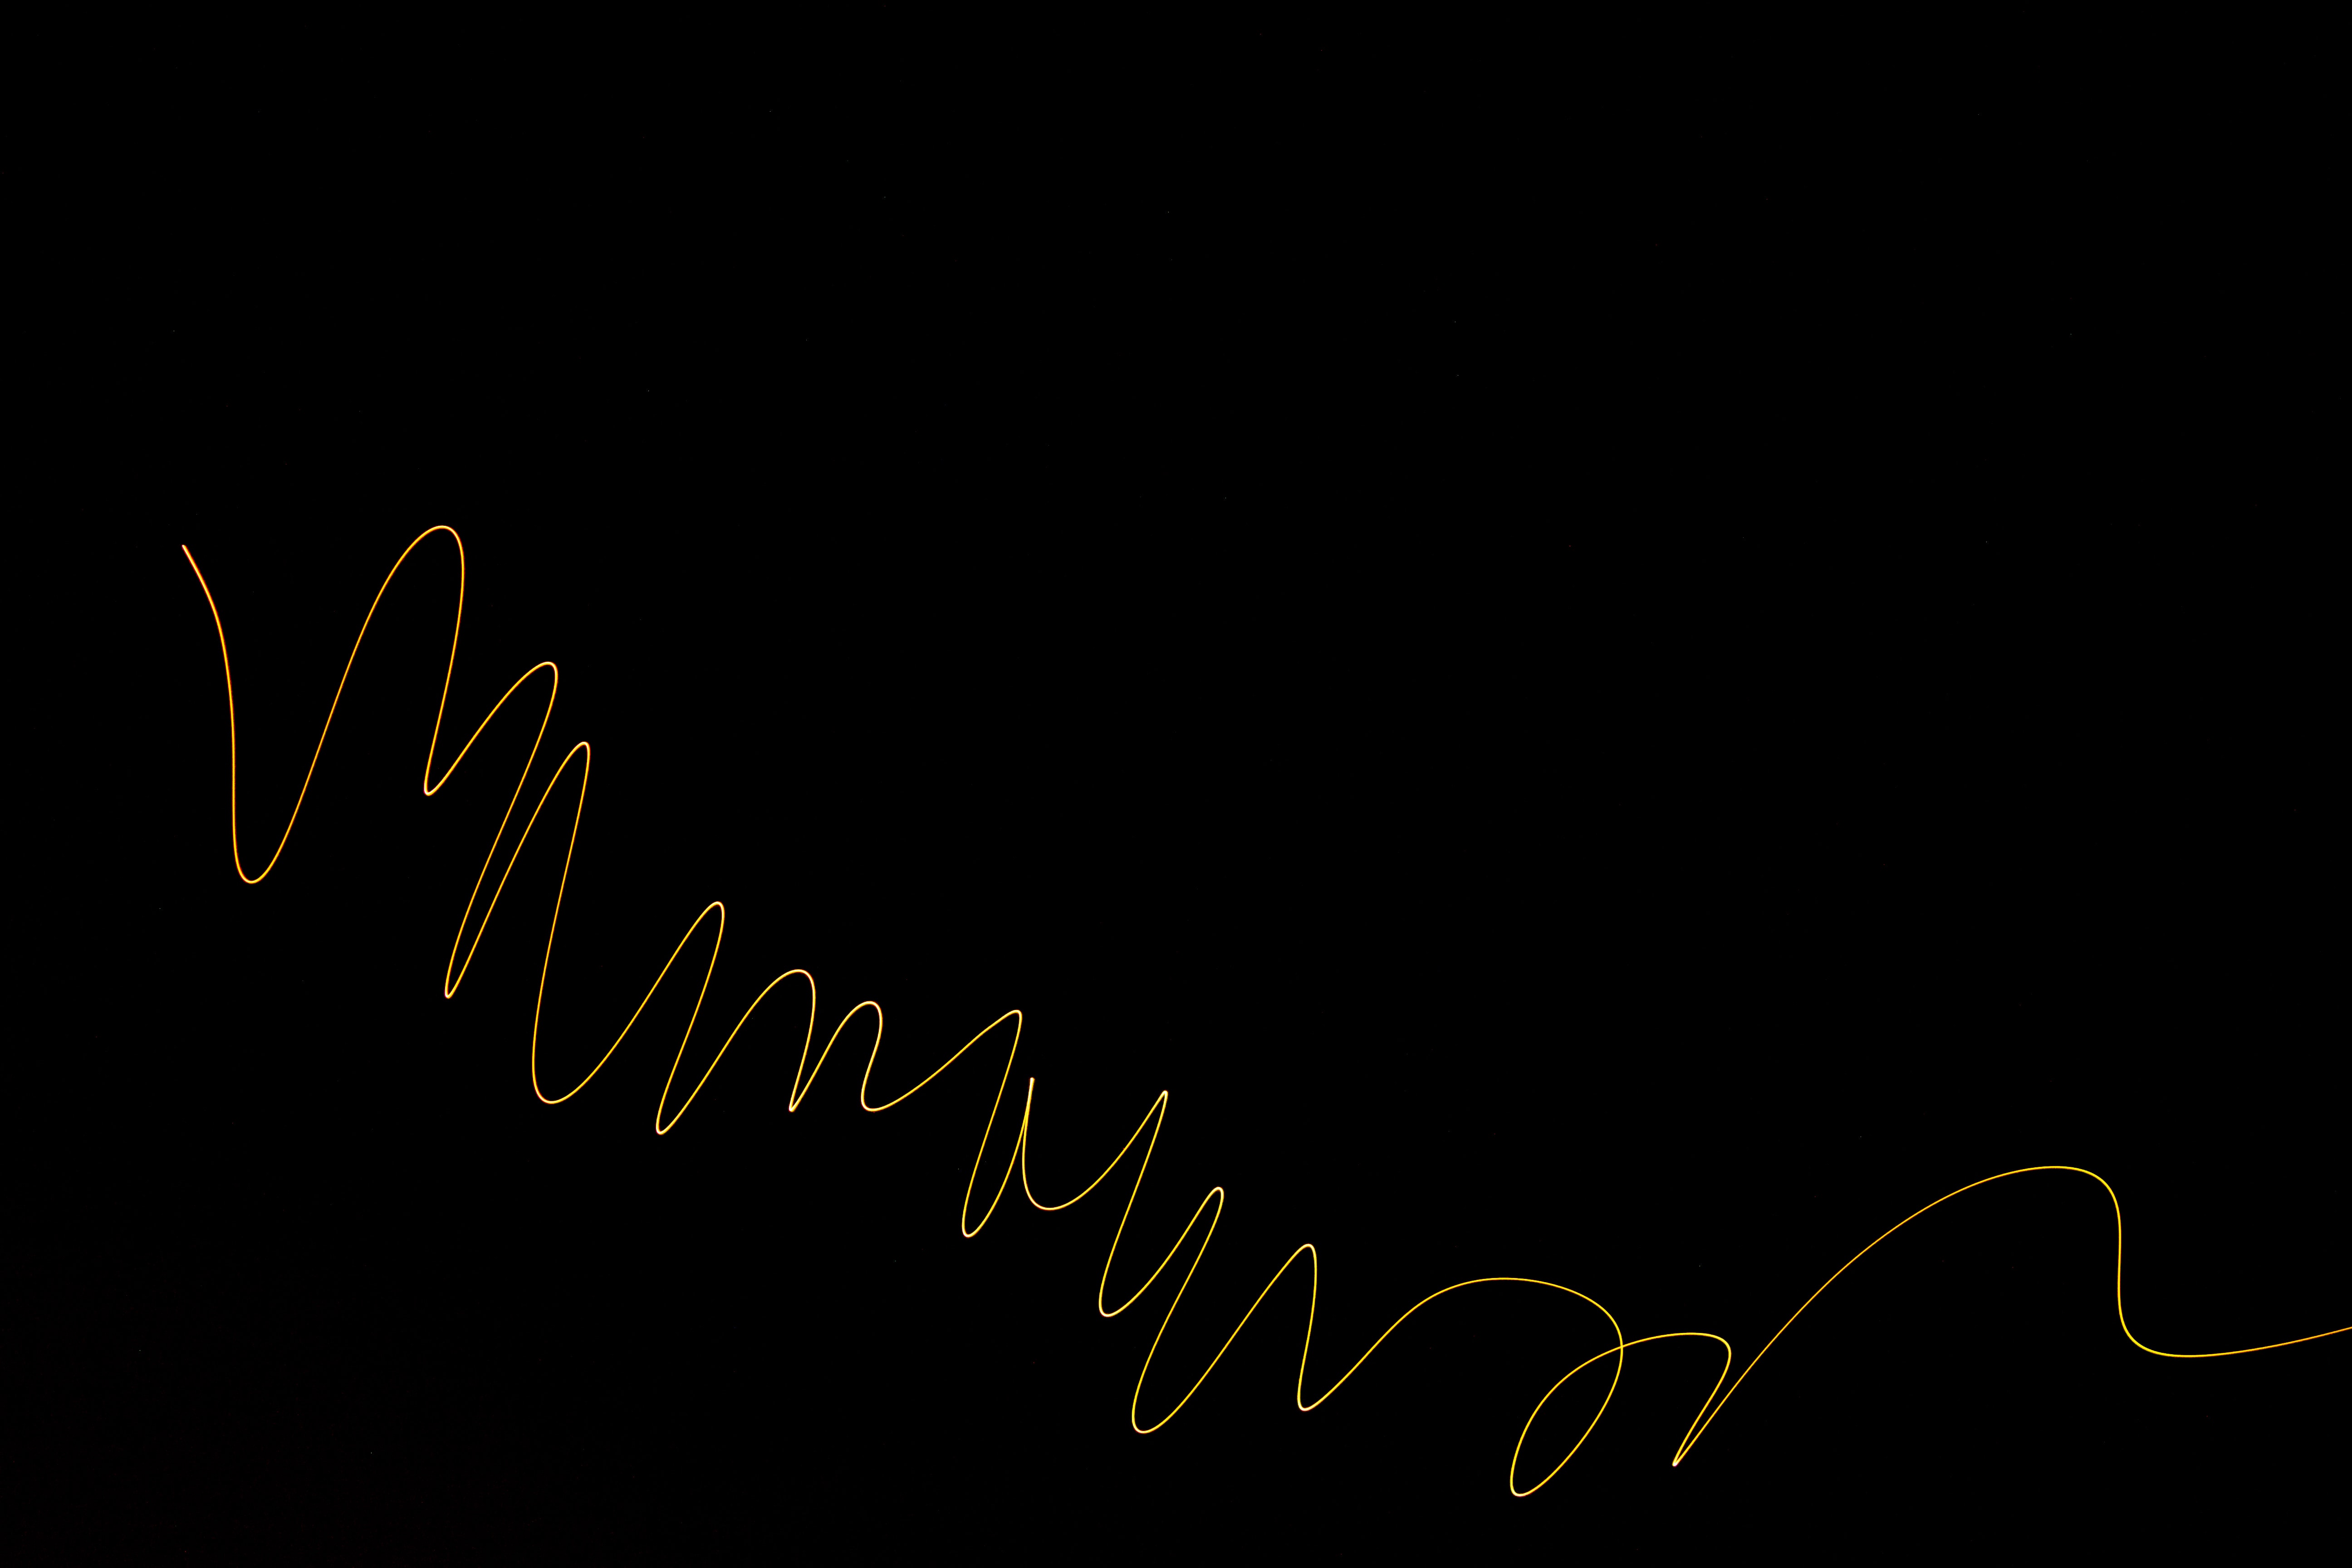 gold, golden, abstract, black, line, winding, sinuous